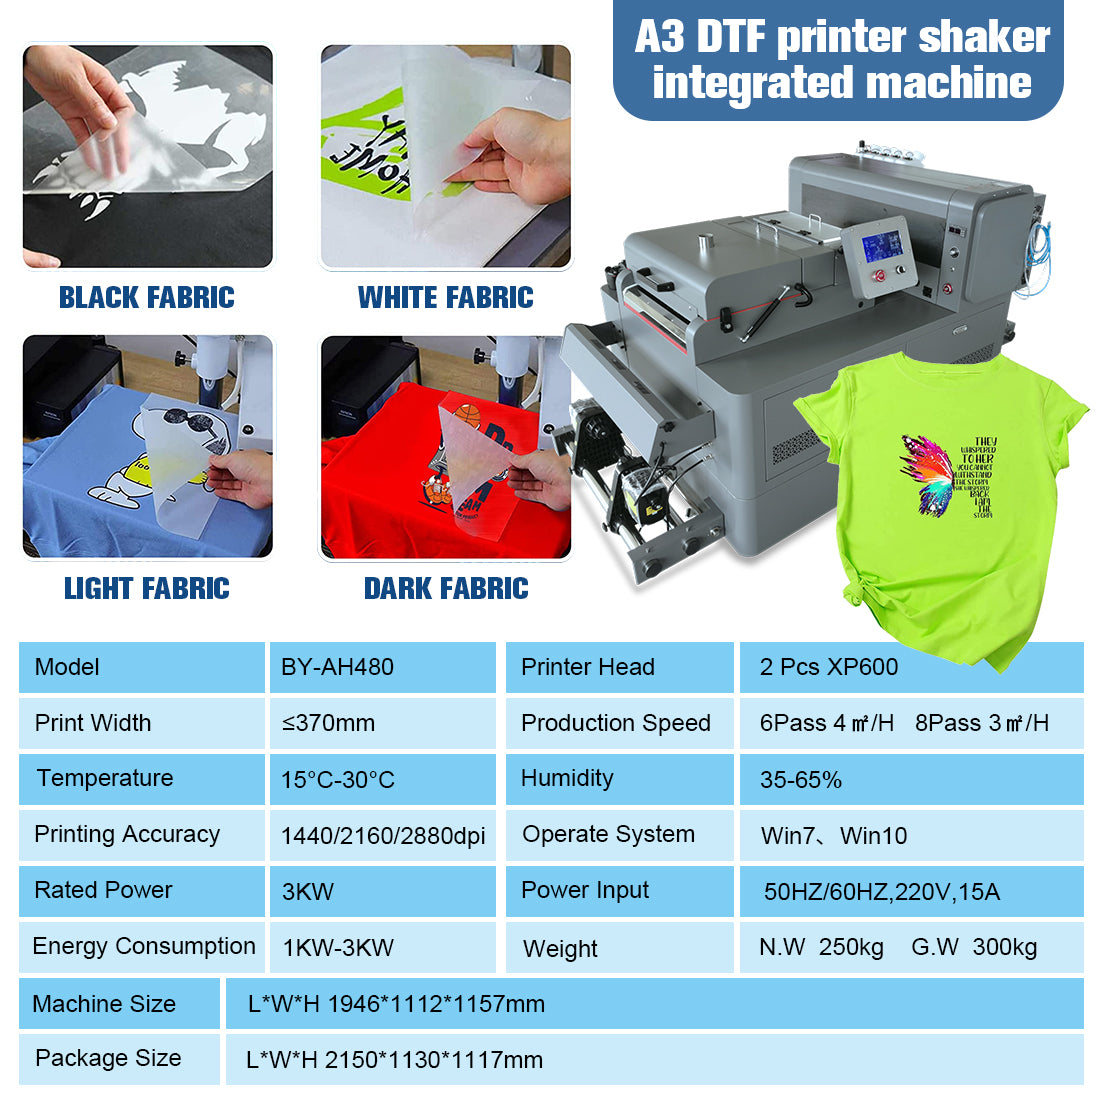 A3 DTF printing shaking powder in one BY-AH480